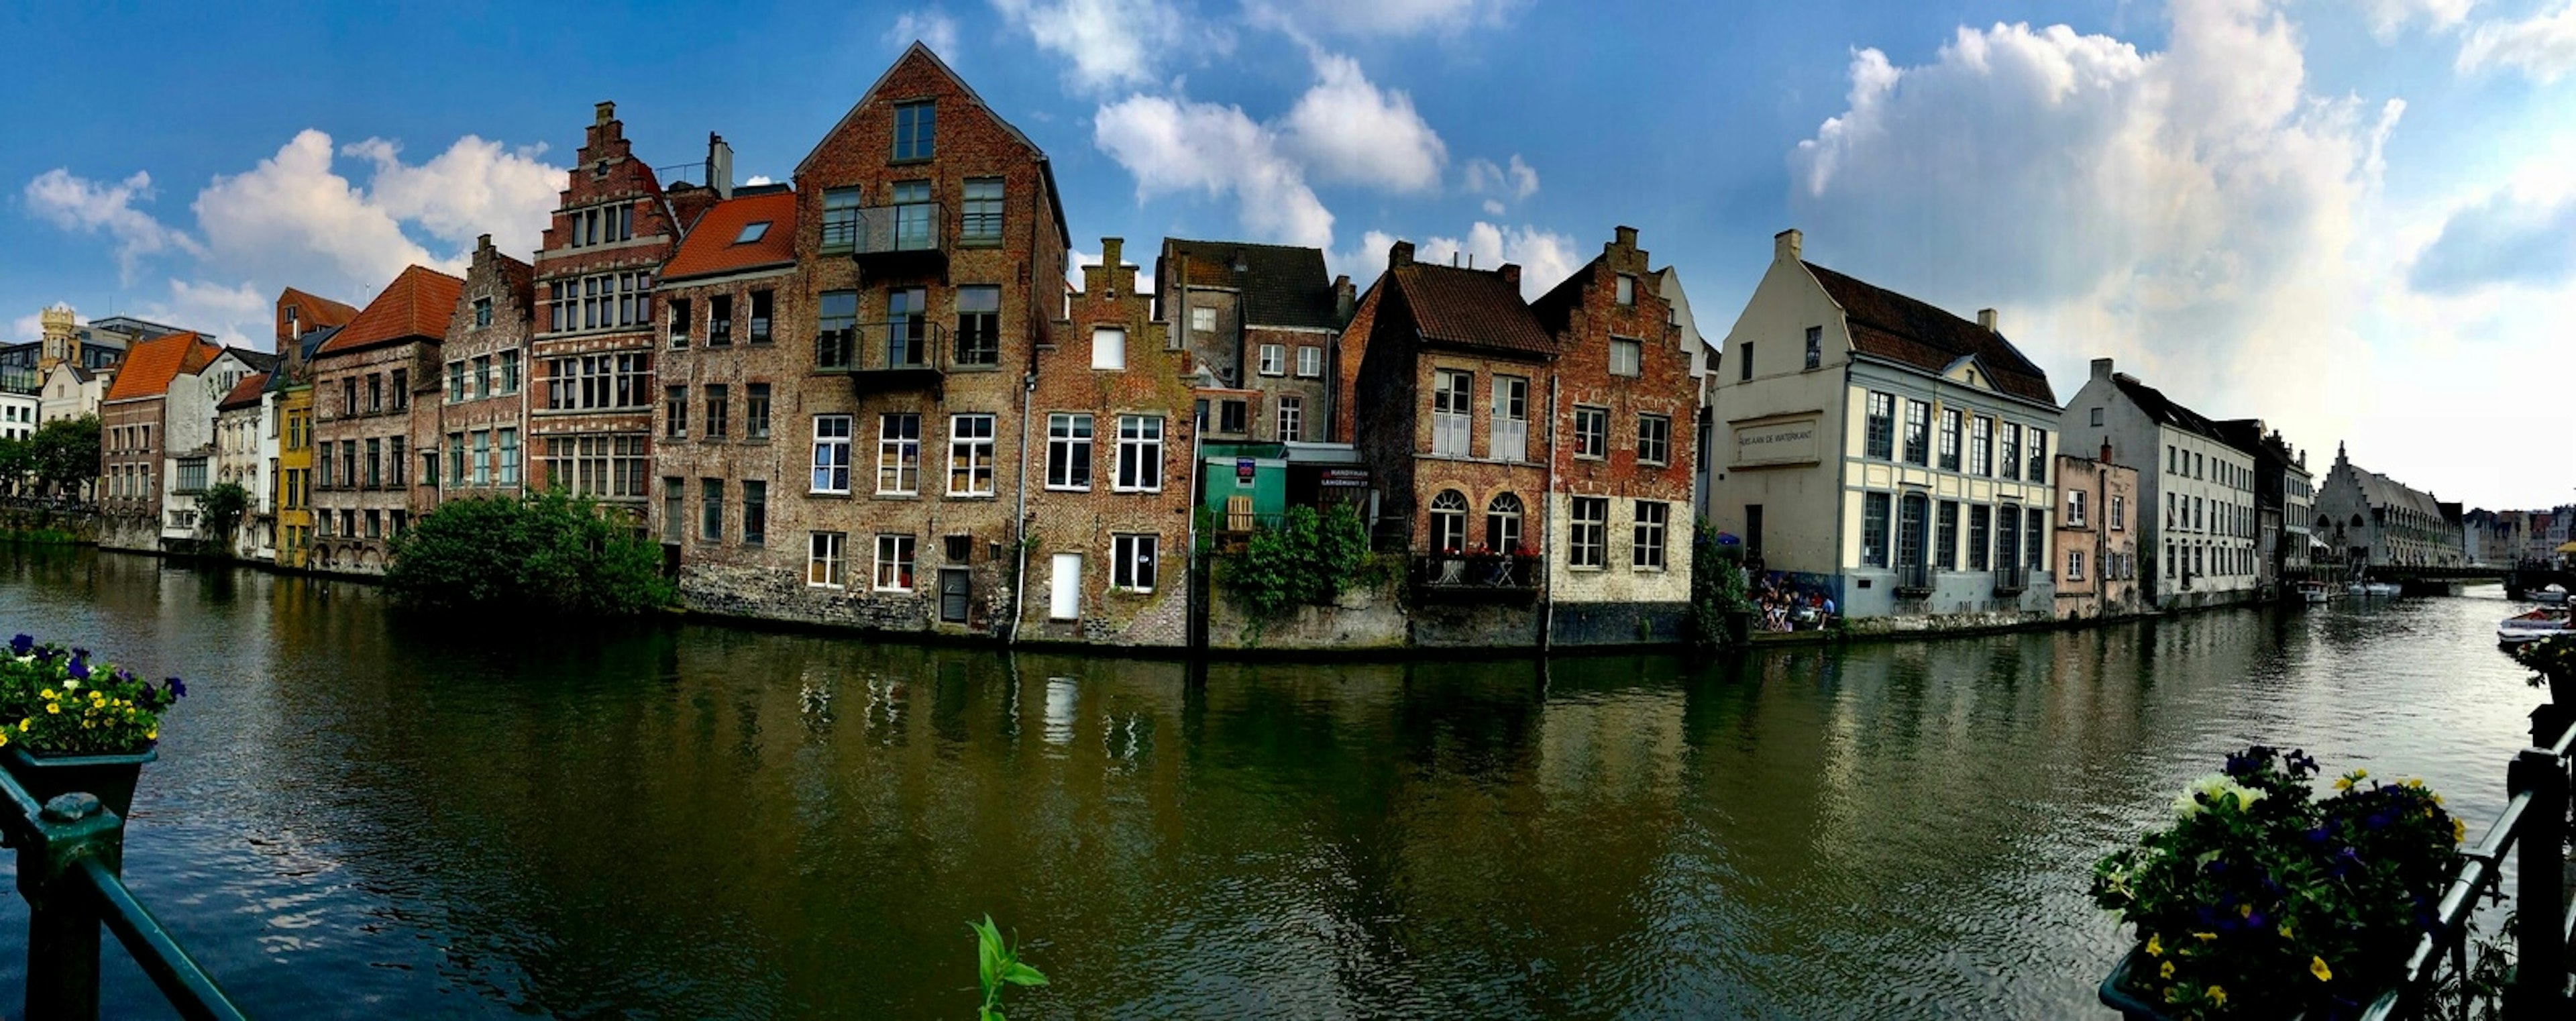 From Ghent with love